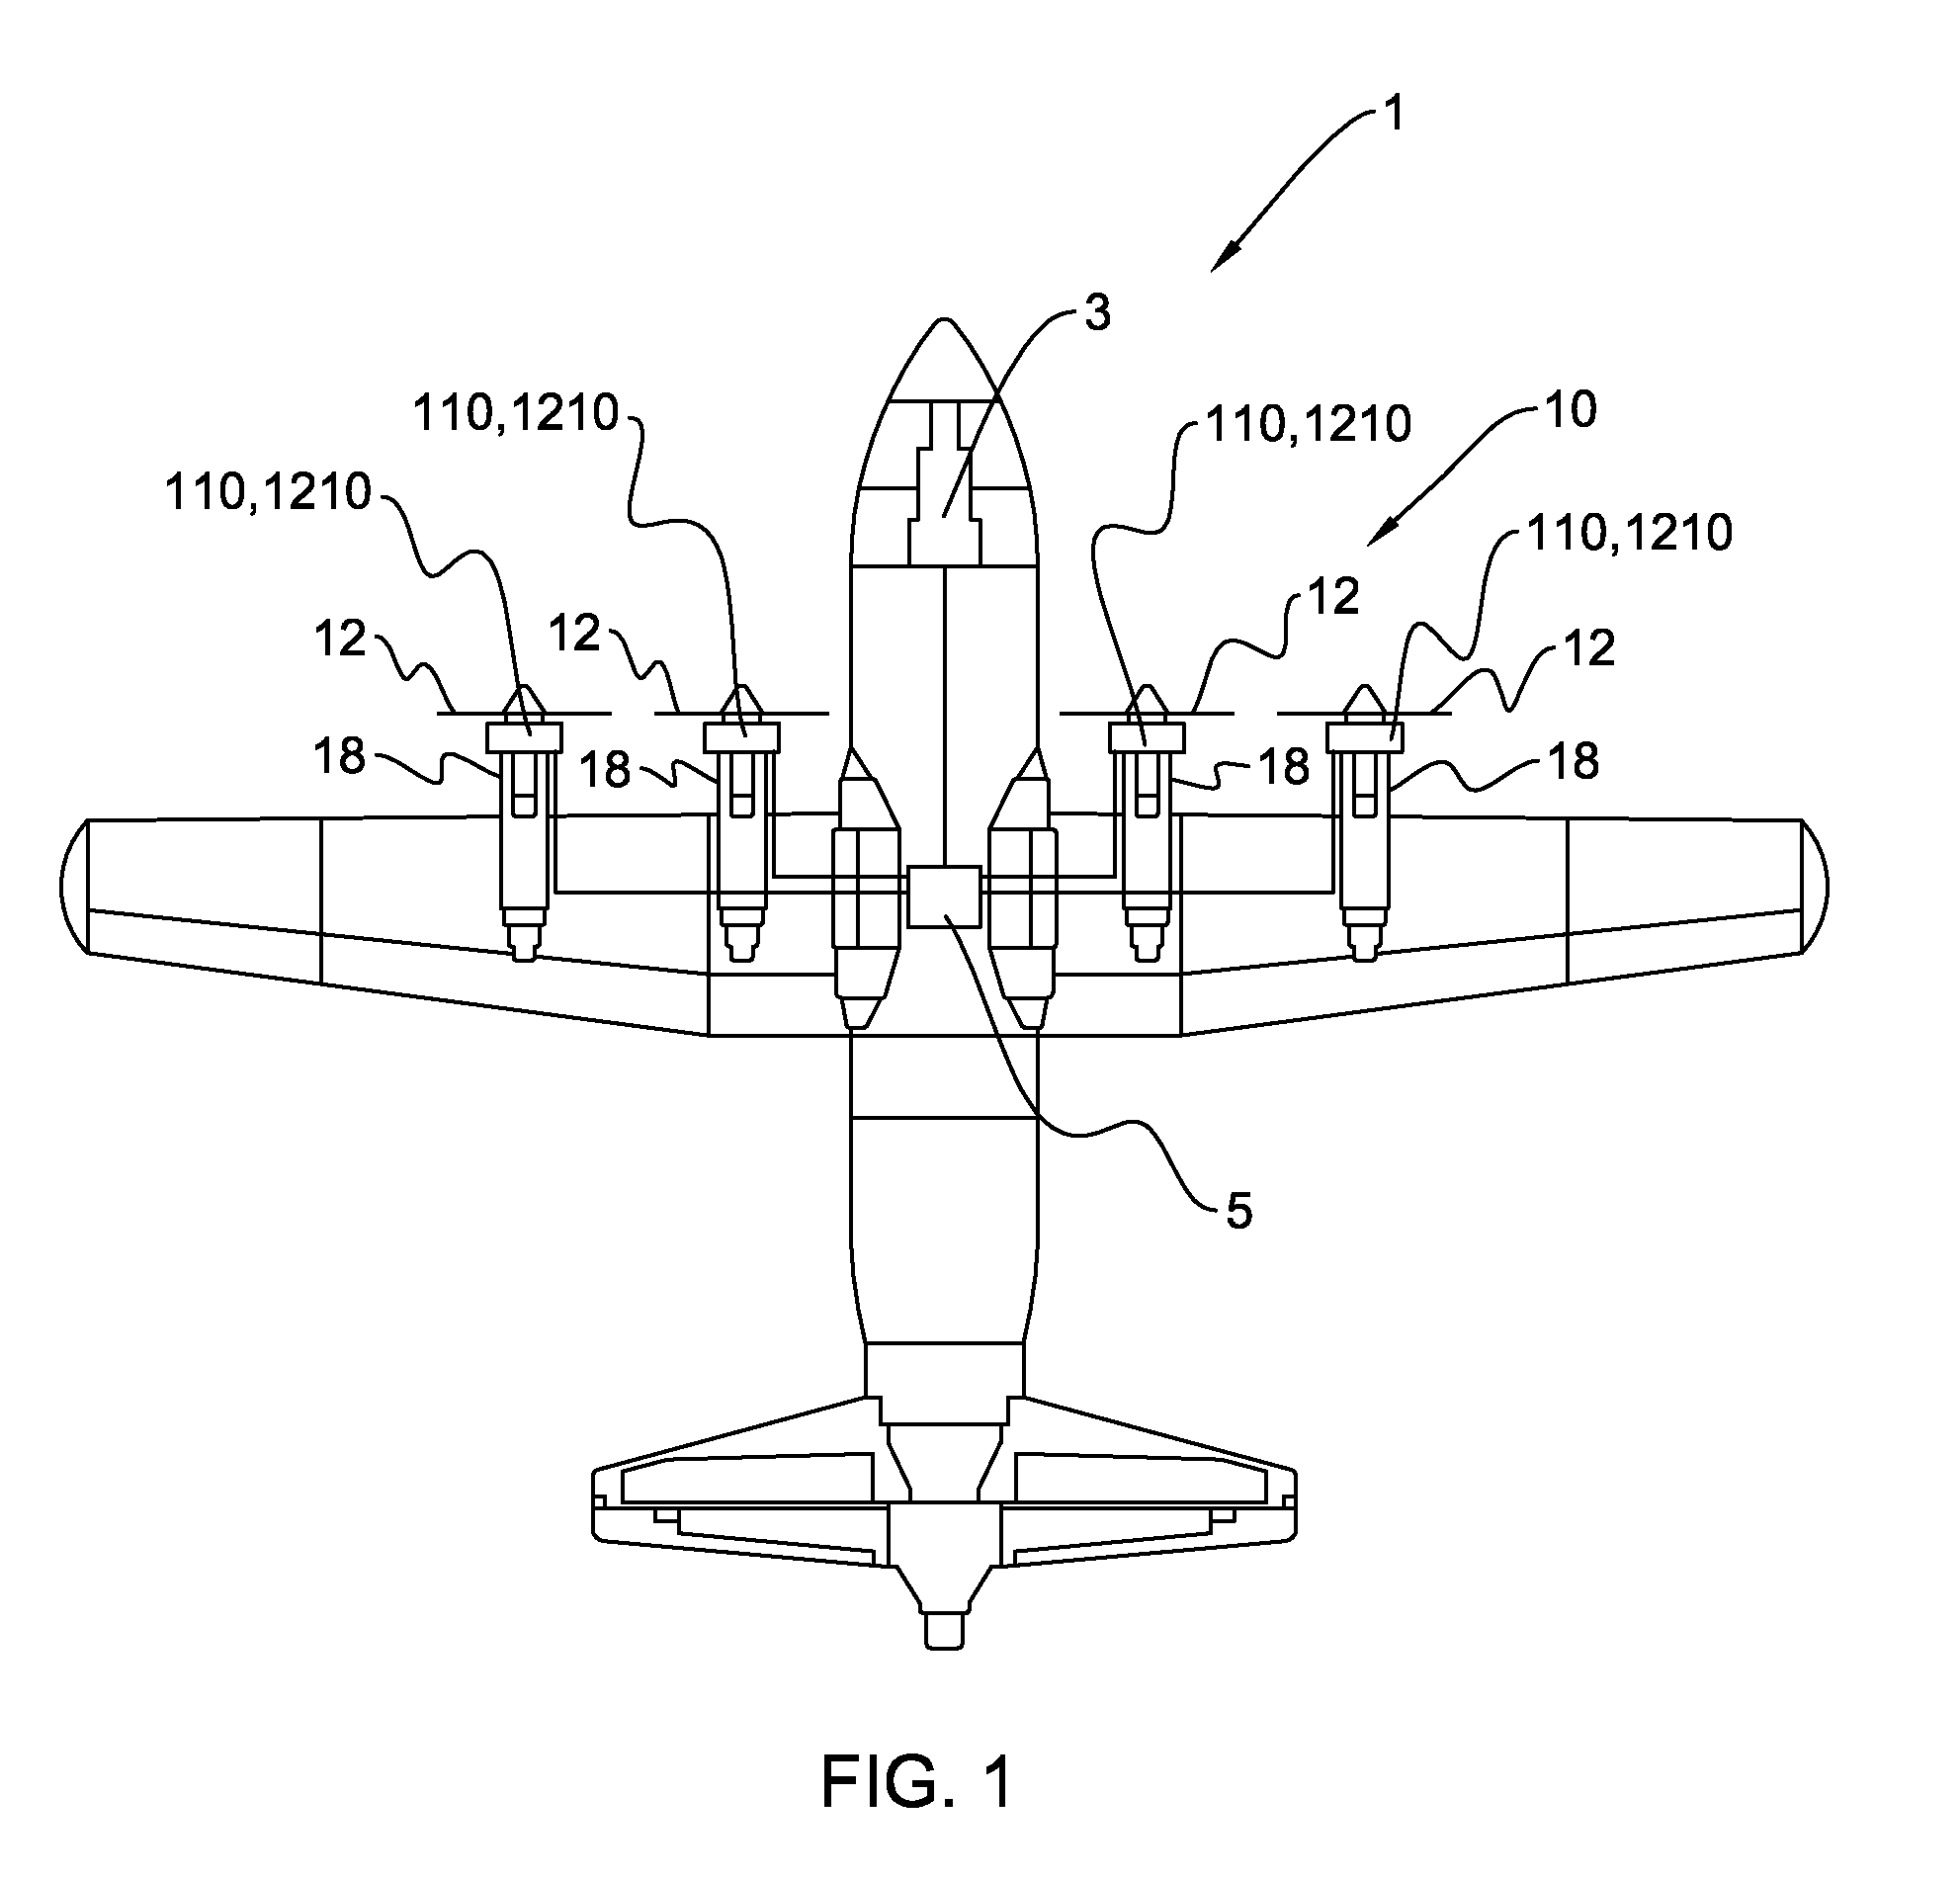 Aircraft with transient-discriminating propeller balancing system